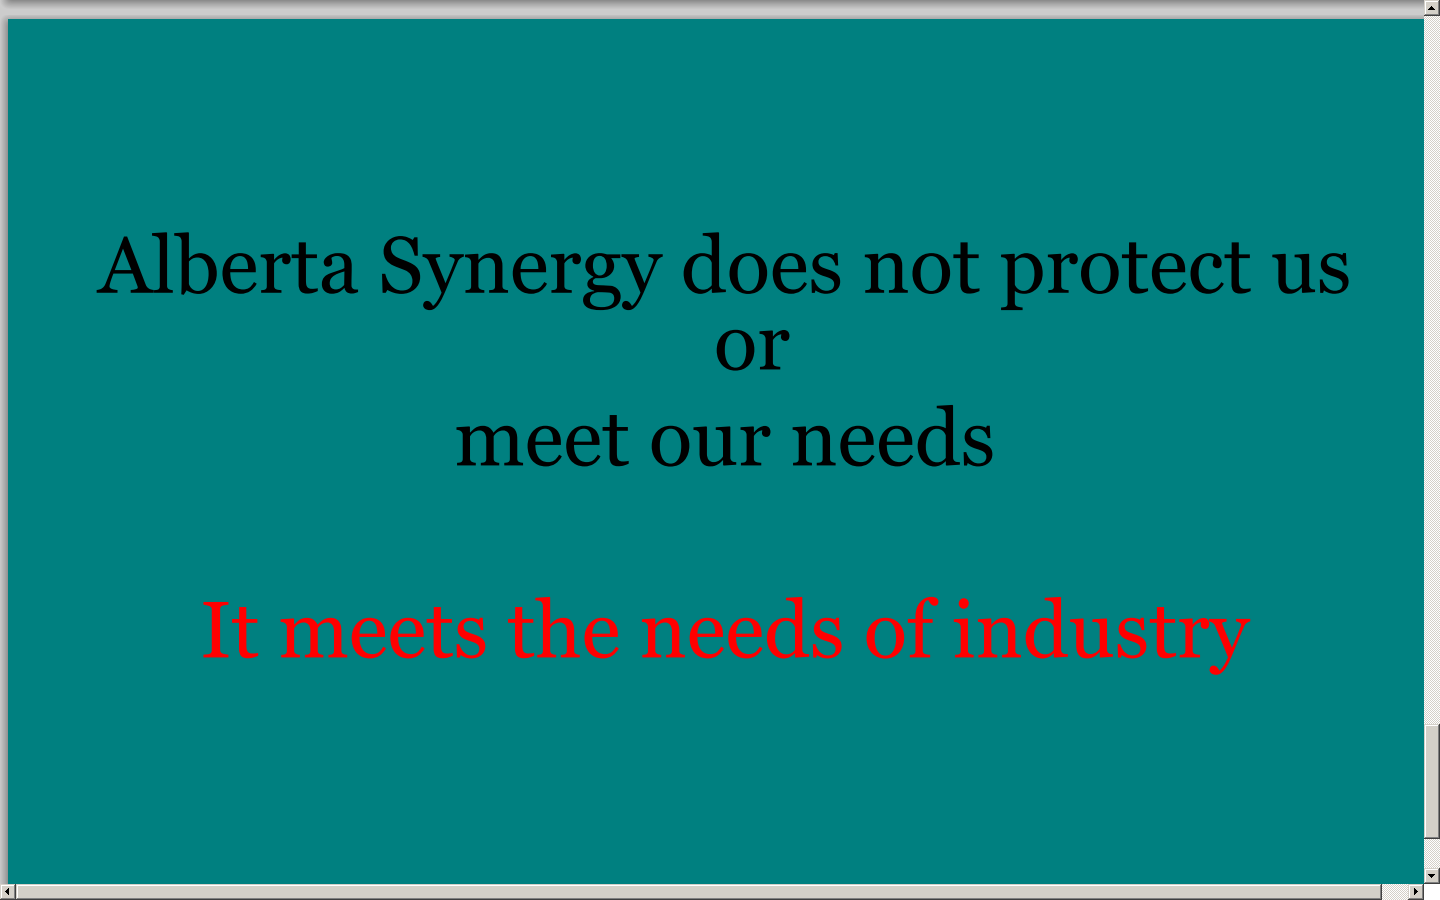 Alberta Synergy protects only industry